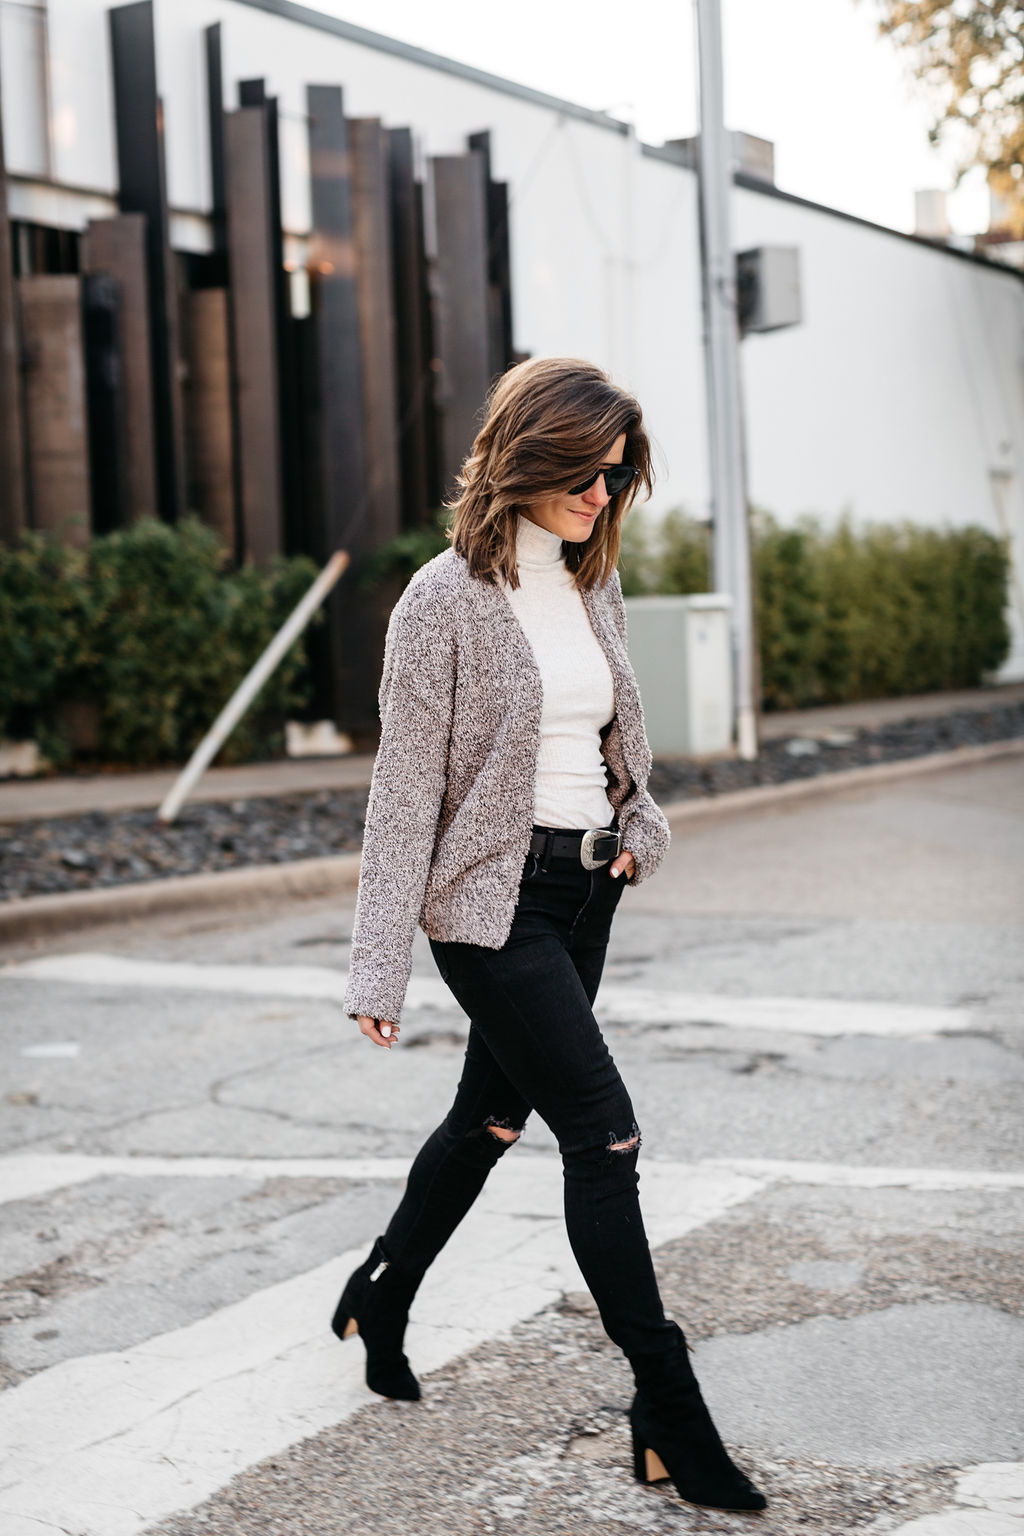 Charcoal Cardigan with Leggings Outfits (12 ideas & outfits